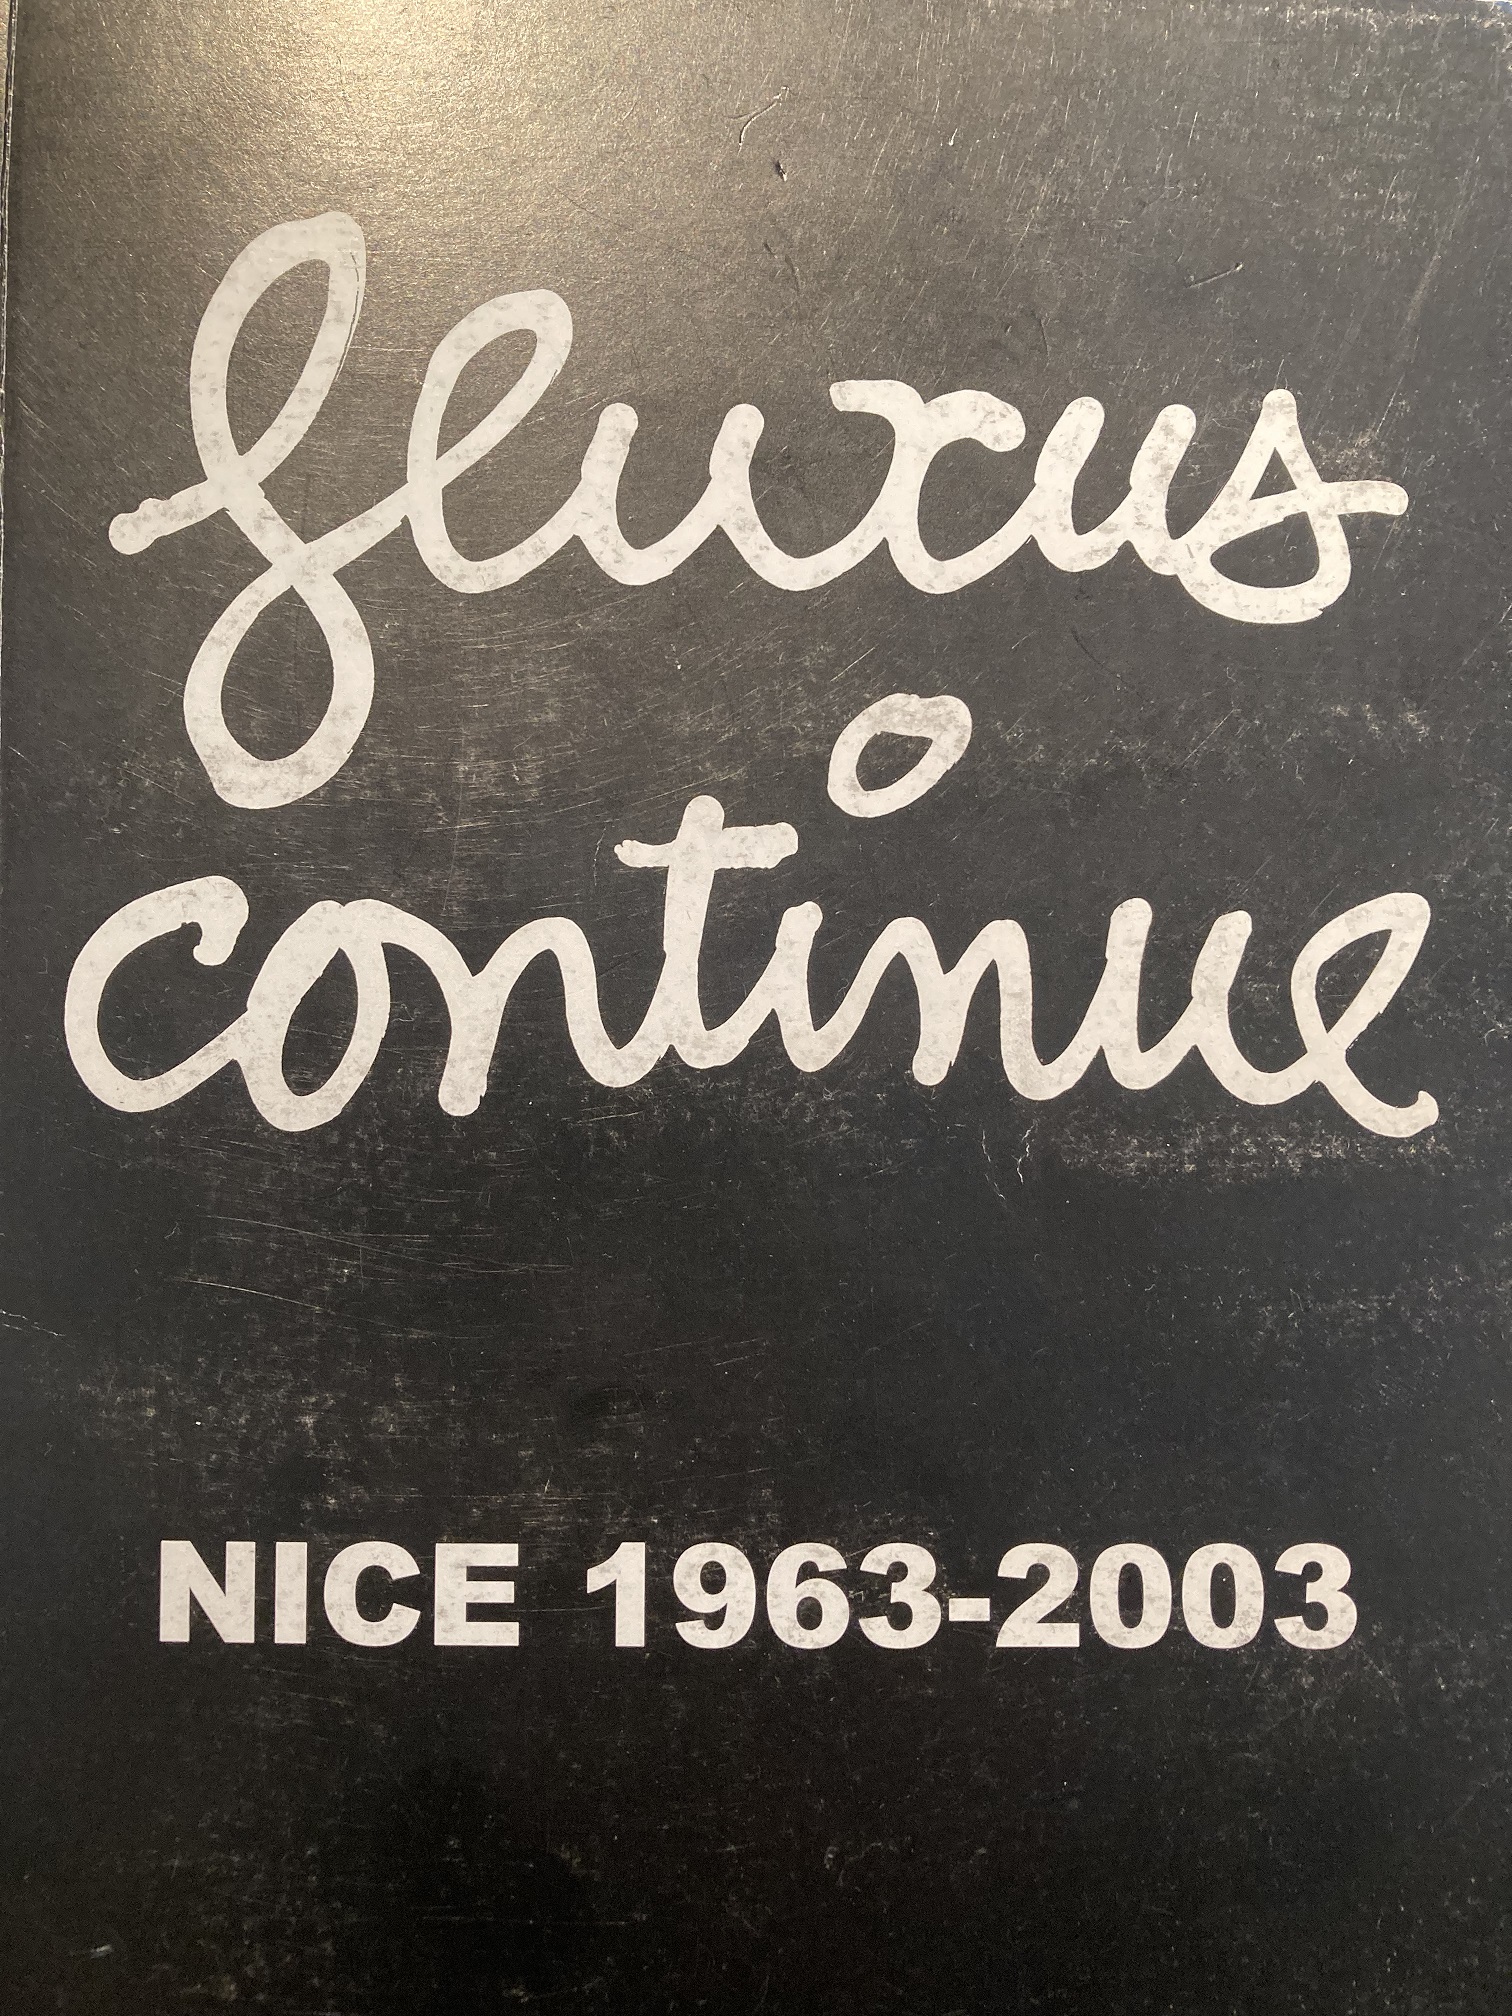 Fluxus-Continue-Nice-1963-2003-cataloge-made-by-Ben-Show-went-to-Bolgna-to-Lyon-to-Geneva-and-back-t